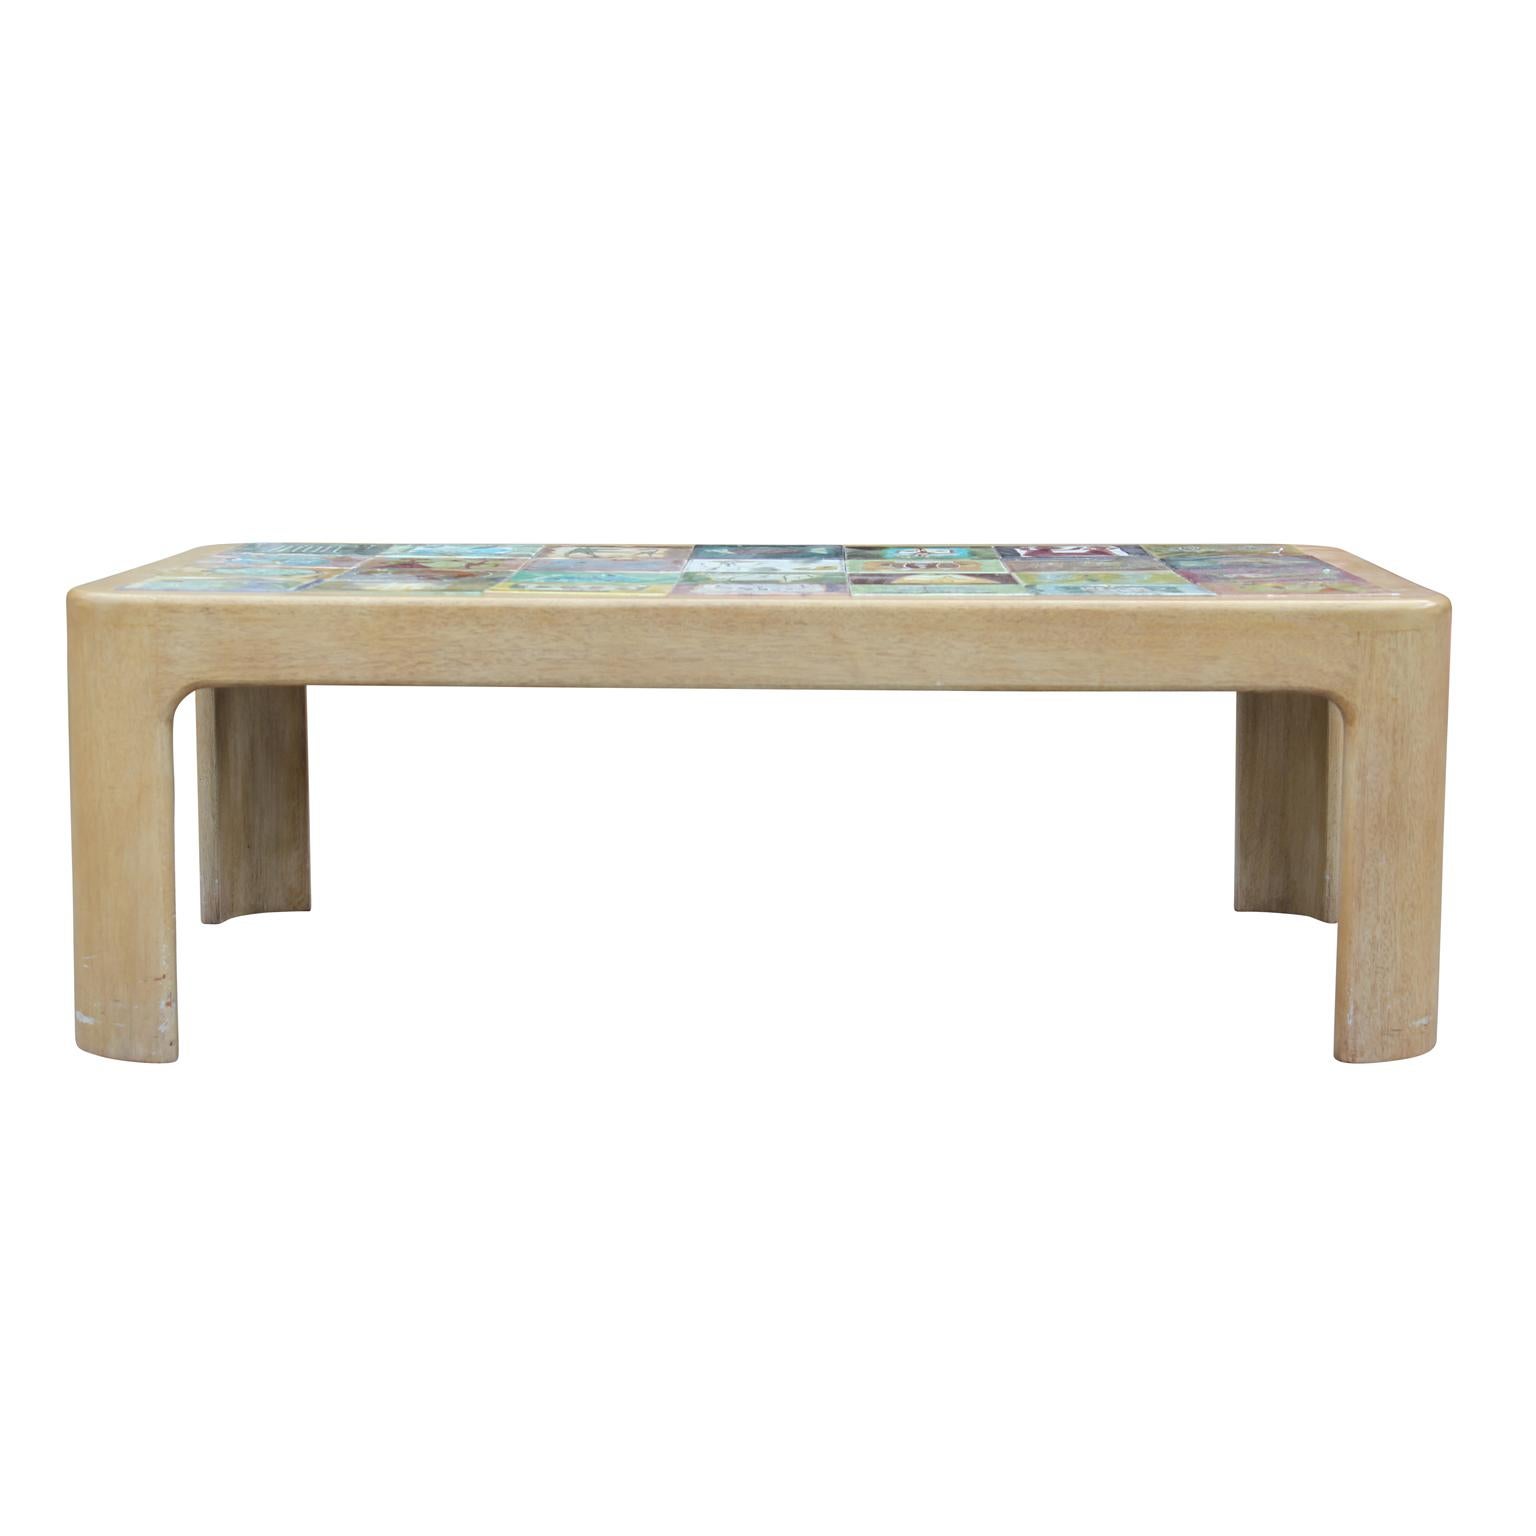 Whimsical coffee table with hand painted tiles in the style of Roger Capron. Would be an excellent statement piece in any room. Each tile is unique, circa 1960s.